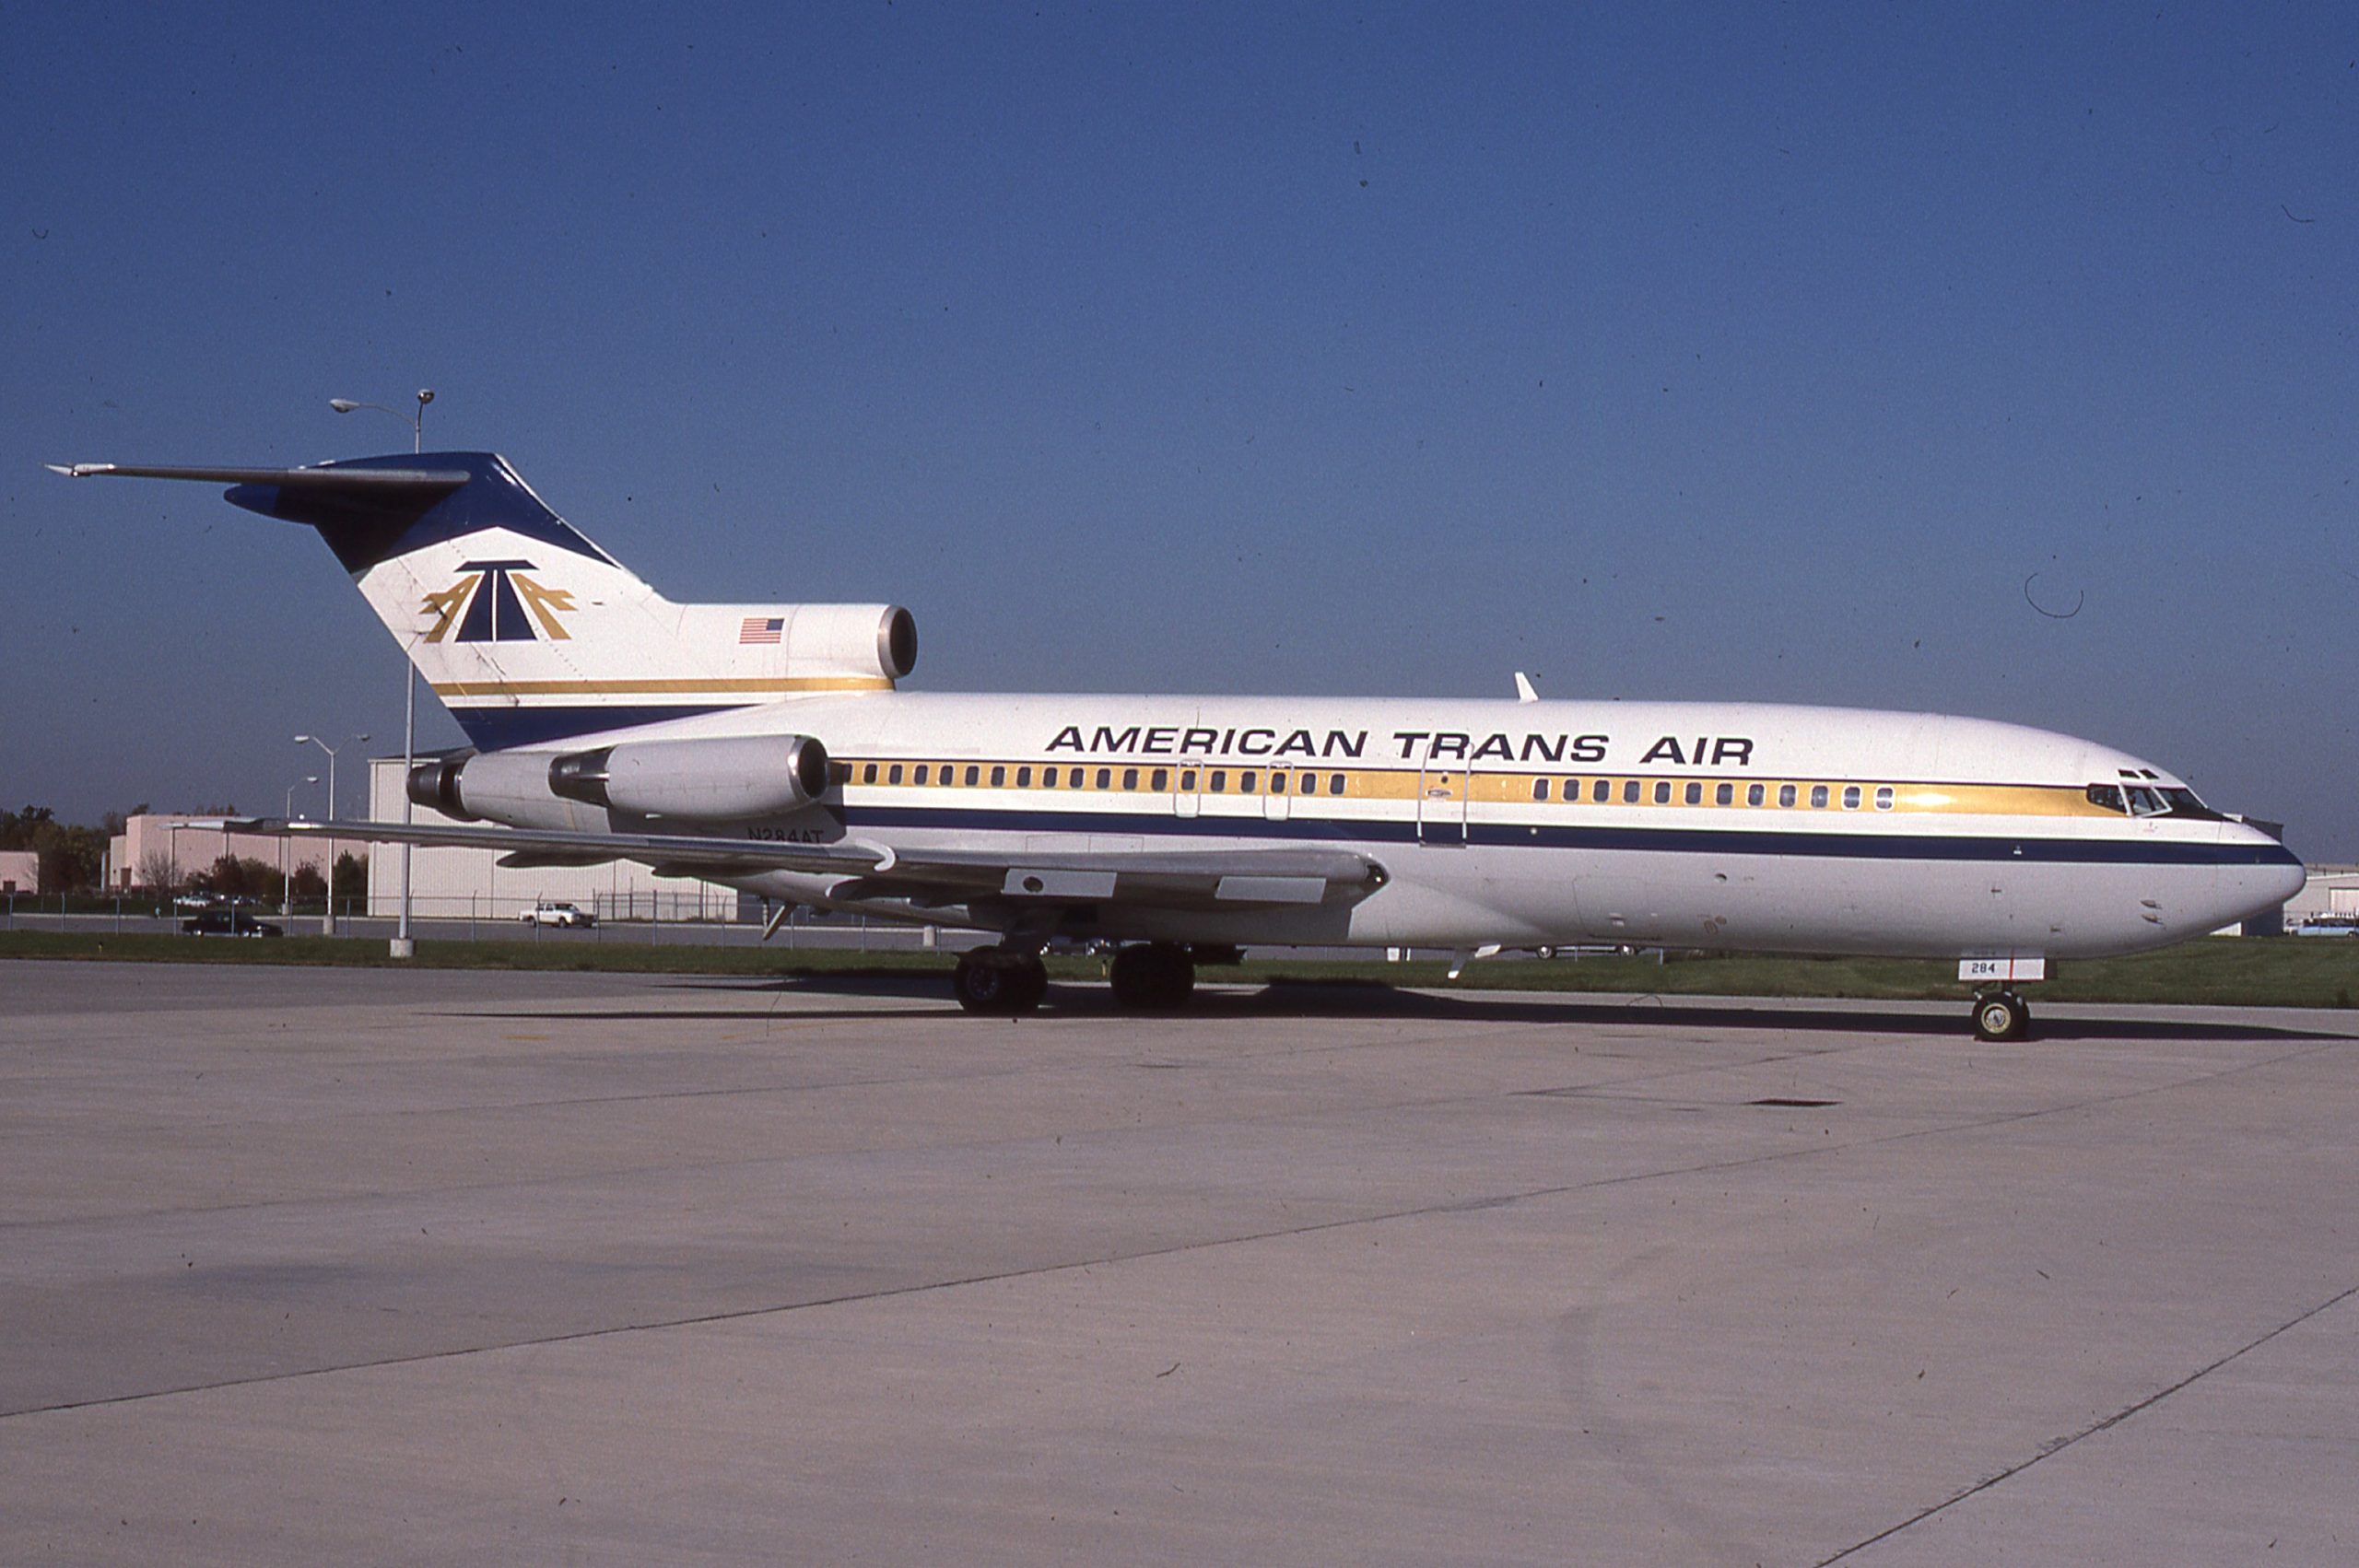 The well-traveled 727 in the story, photographed by the author at Indianapolis International Airport (IND) in October 1990.